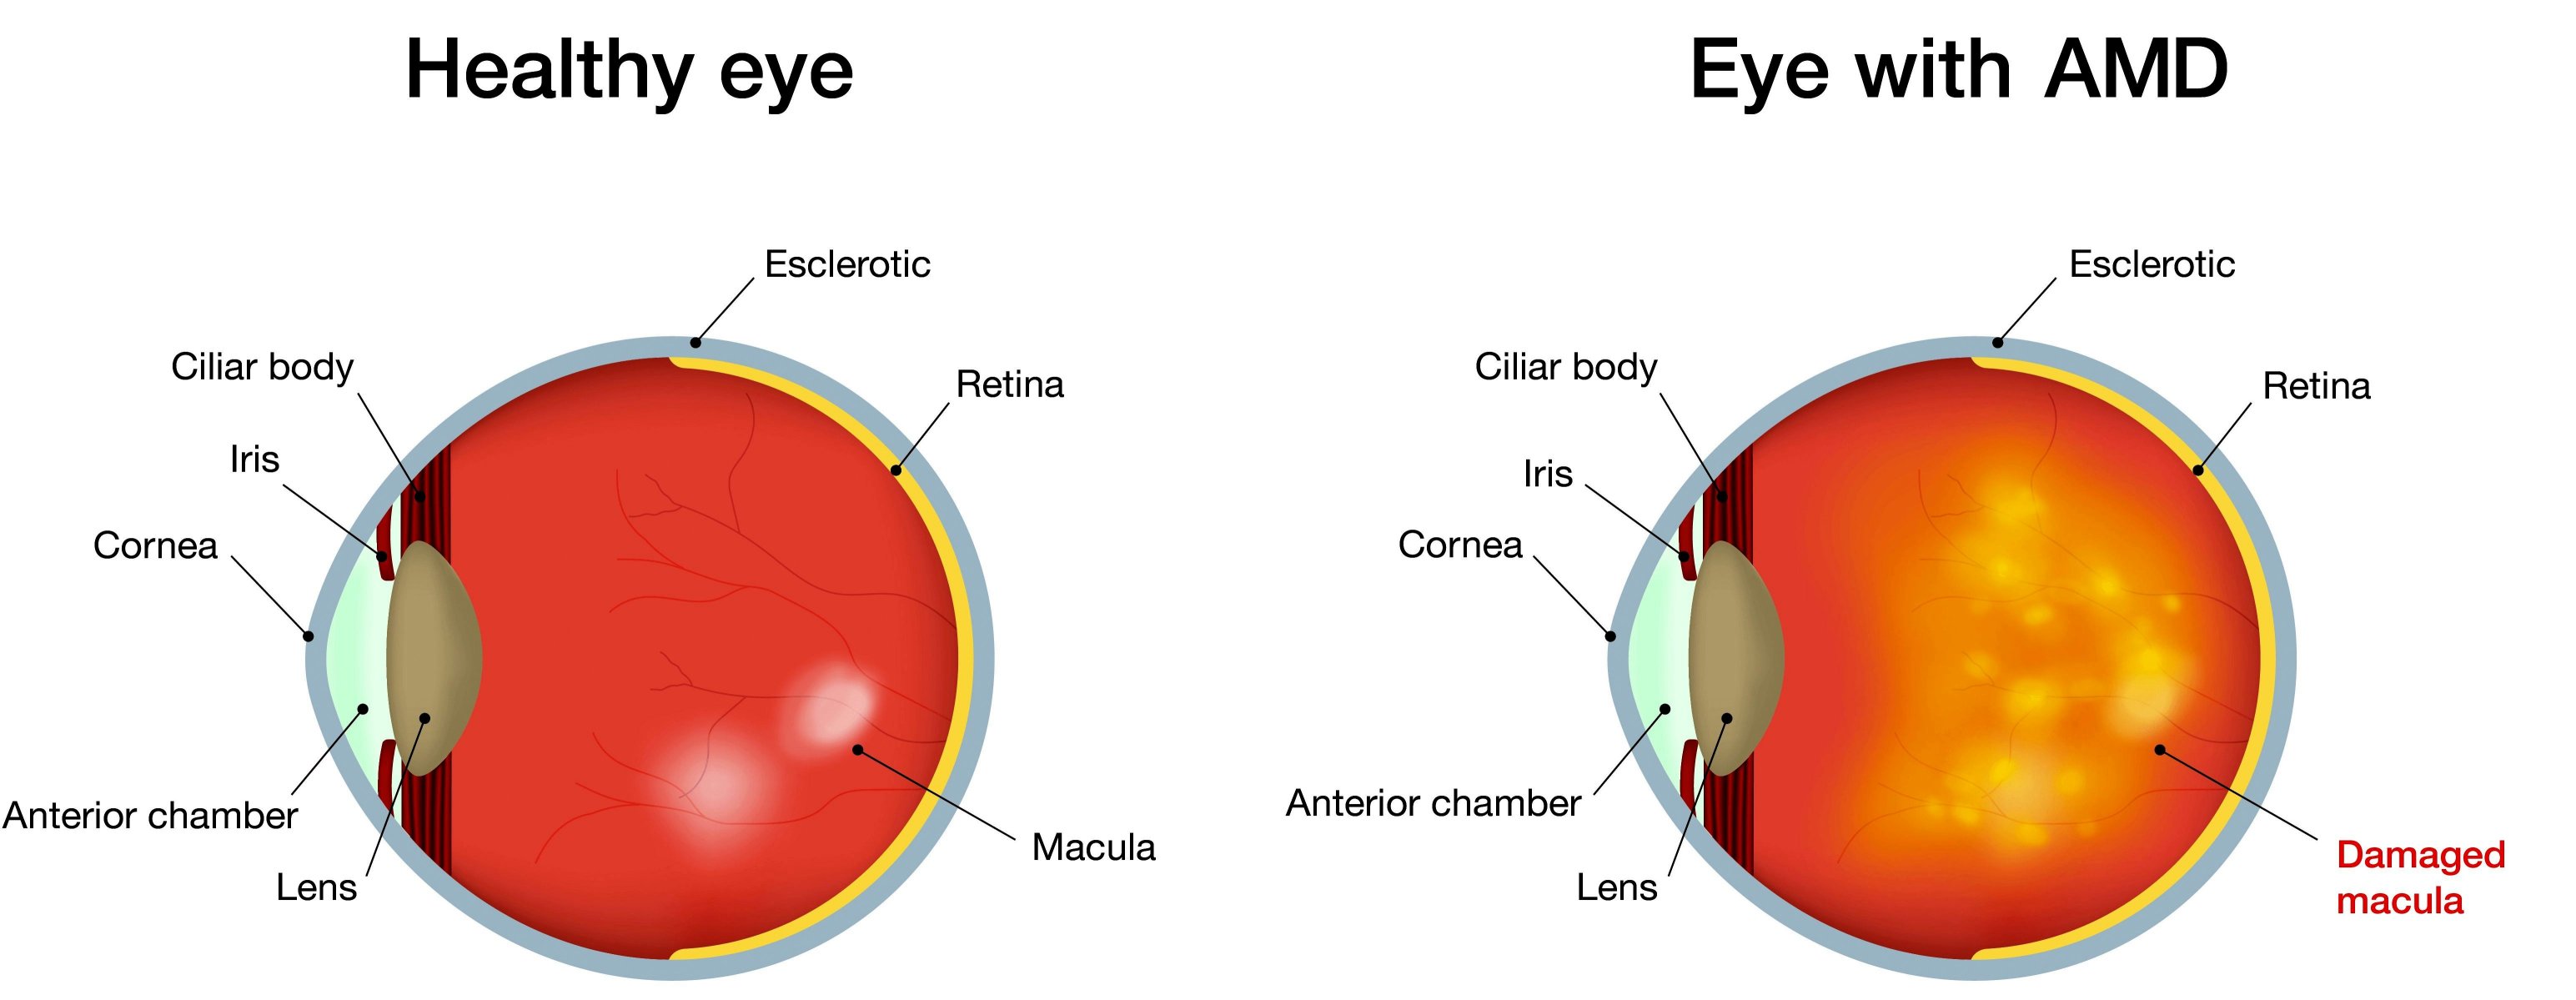 Age Related Macular Degeneration Google image from http://www.dignity-eyecare.co.uk/wp-content/uploads/2017/01/mak-degenation-image-tiny.png